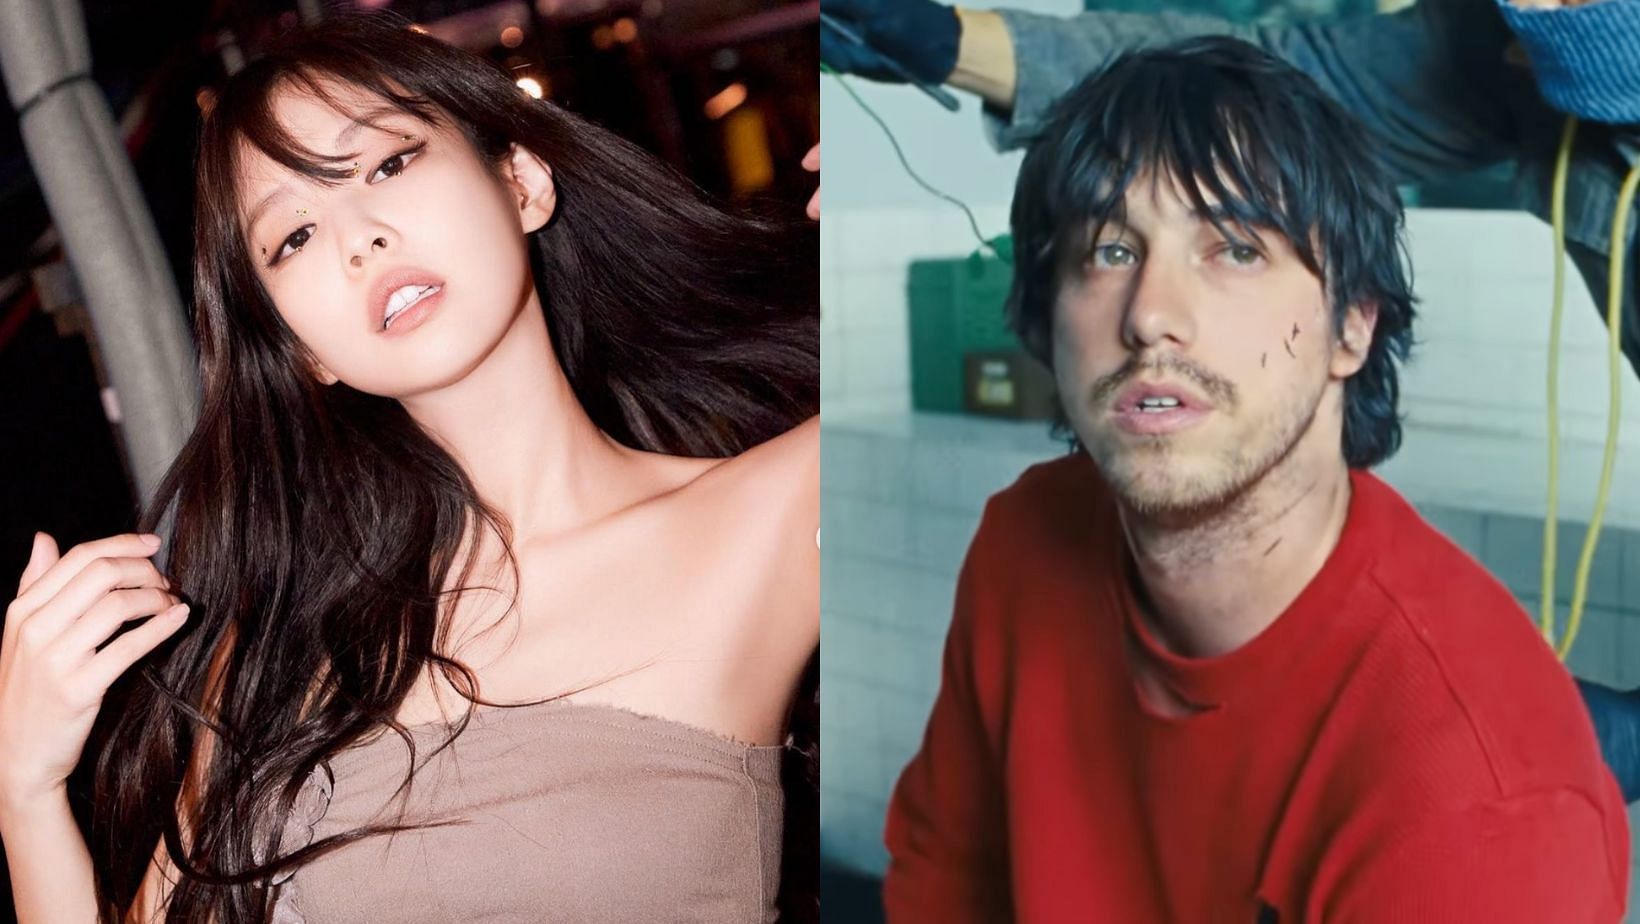 Jennie is set to feature on Matt Champion&rsquo;s upcoming solo &lsquo;Slow Motion&rsquo;. (Images via Instagram/@ jennierubyjane and @himattchampion)